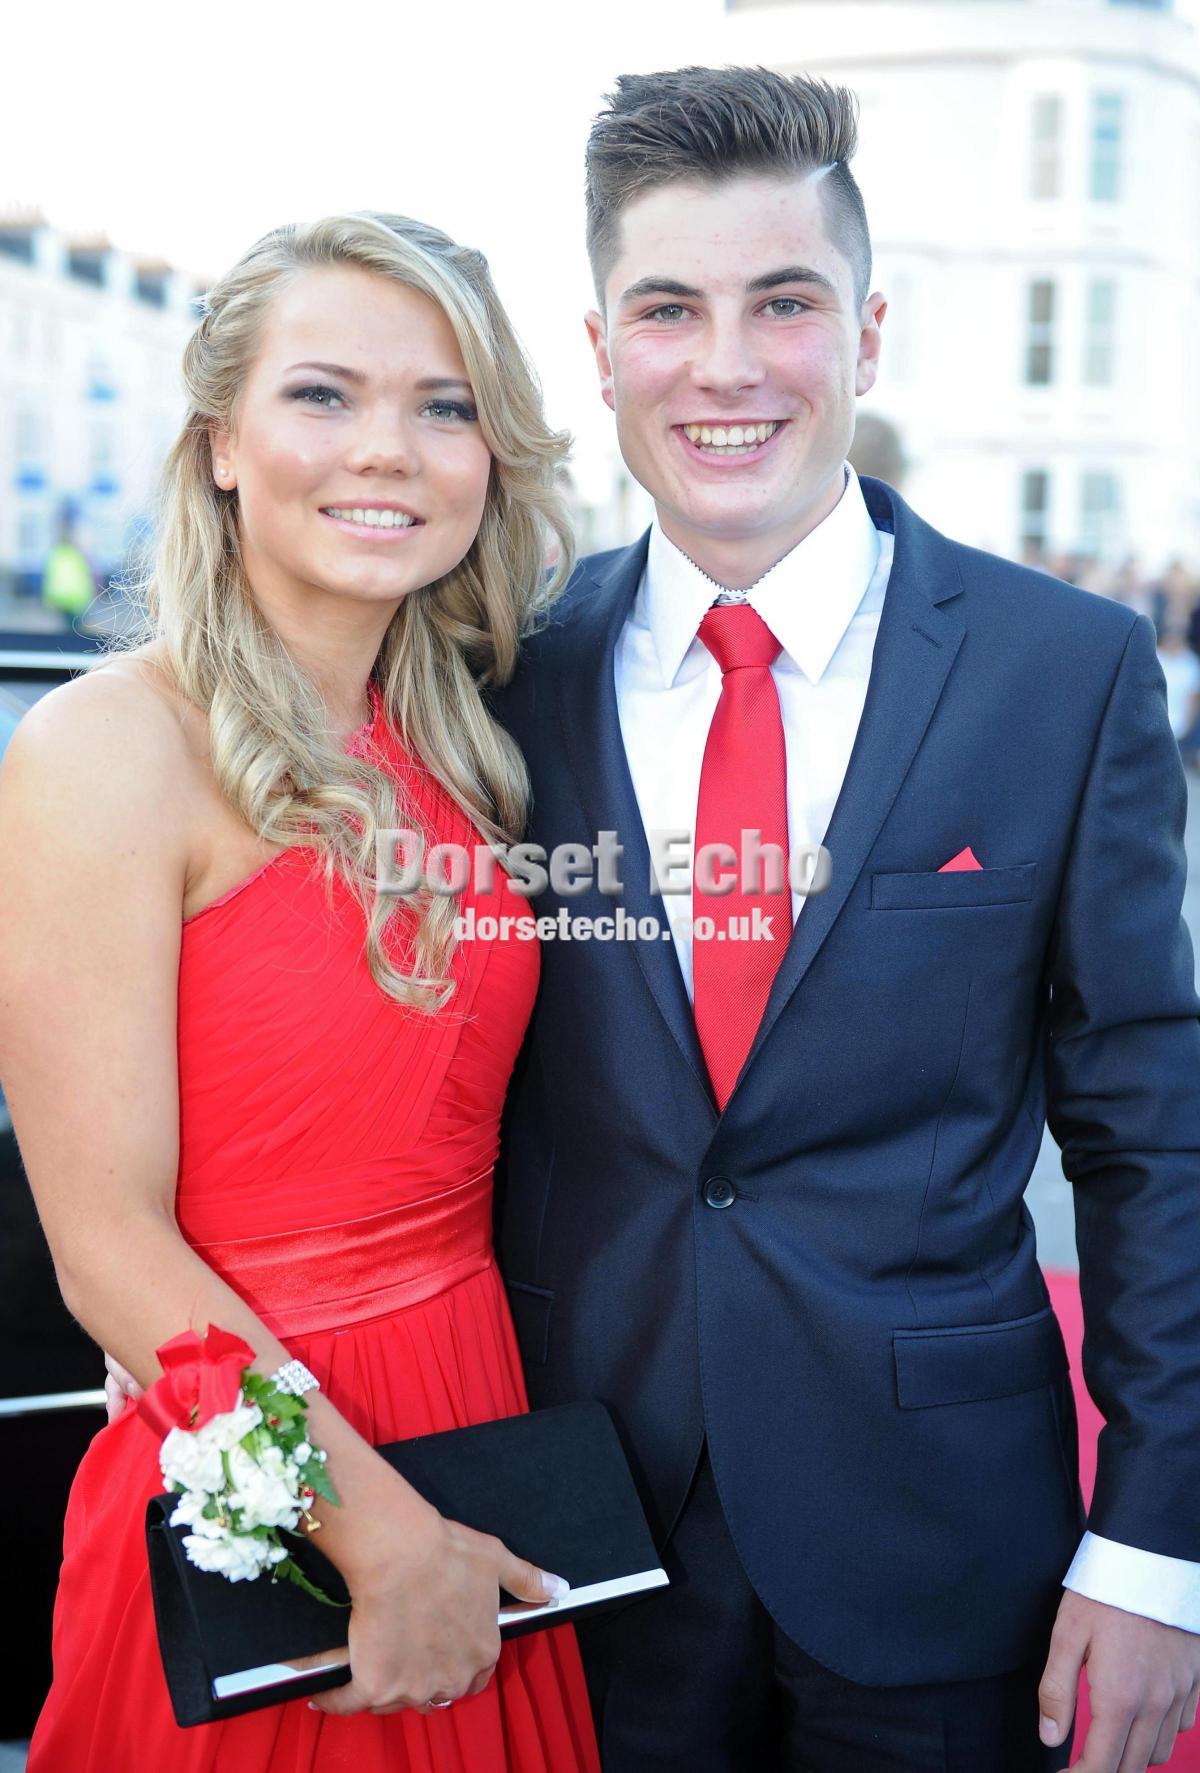 All Saints Prom 2014
Pictures by Finnbarr Webster